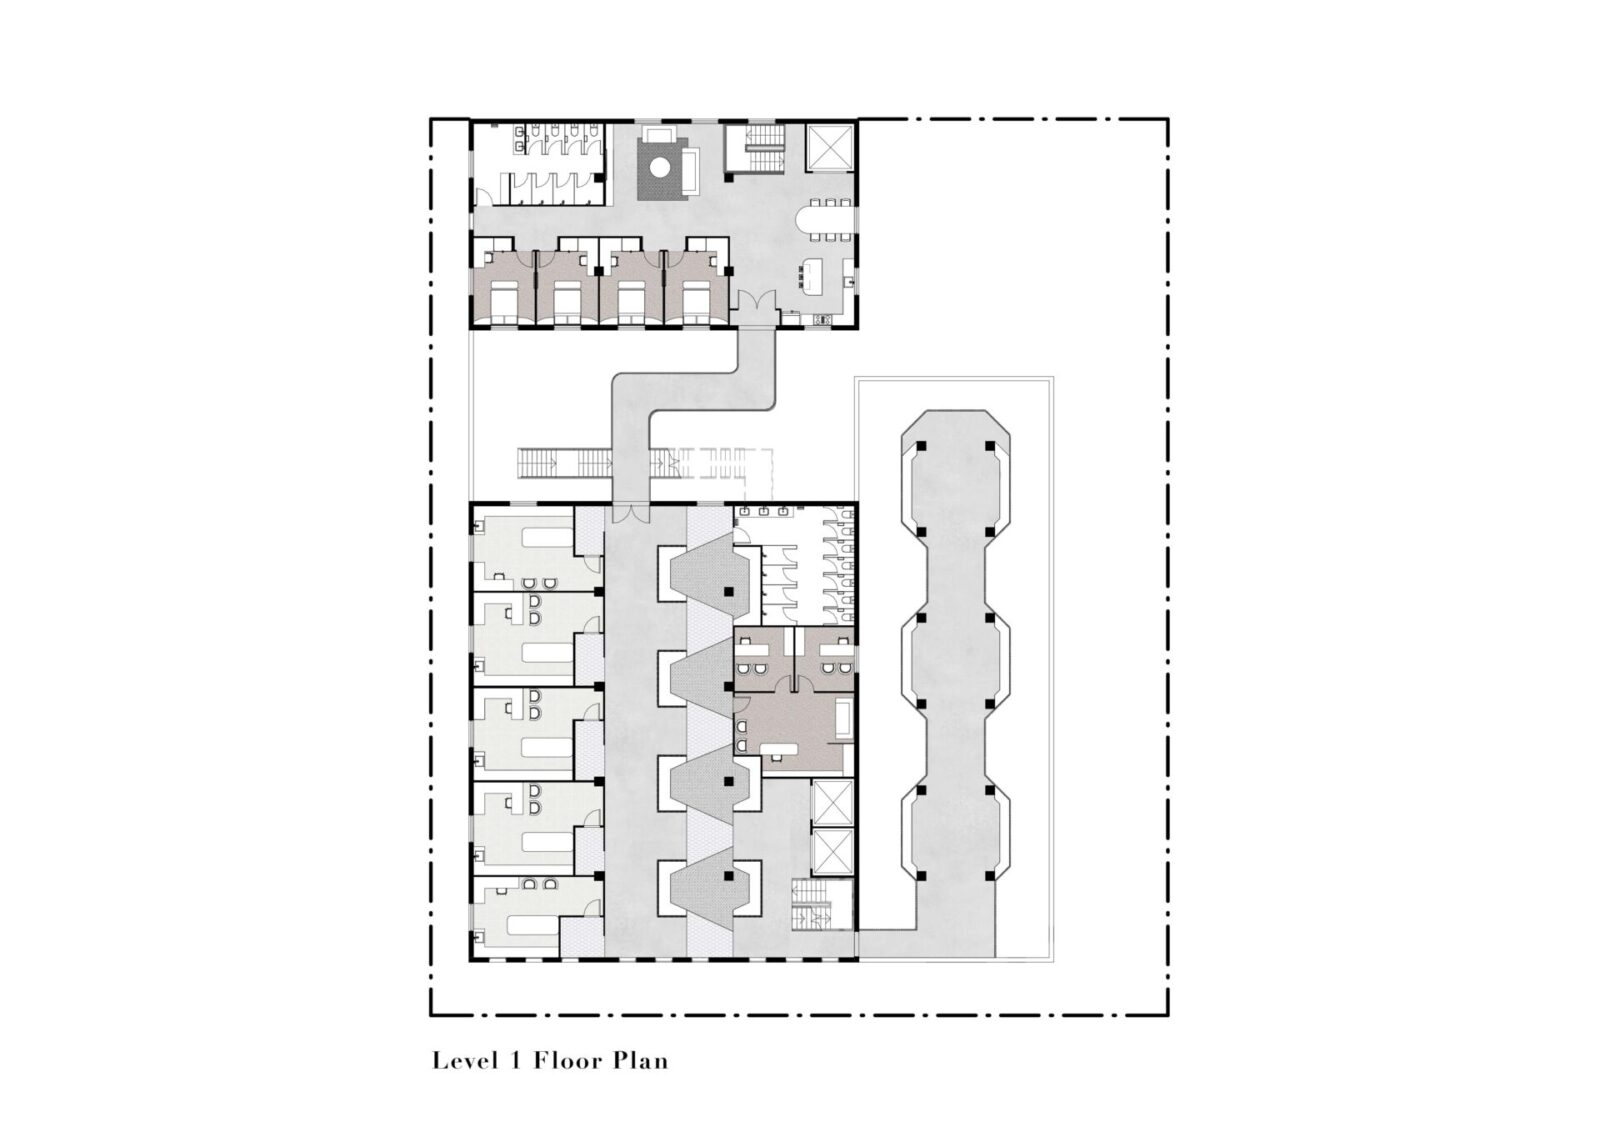 Level 1 floor plan for Stand Up Facility. 